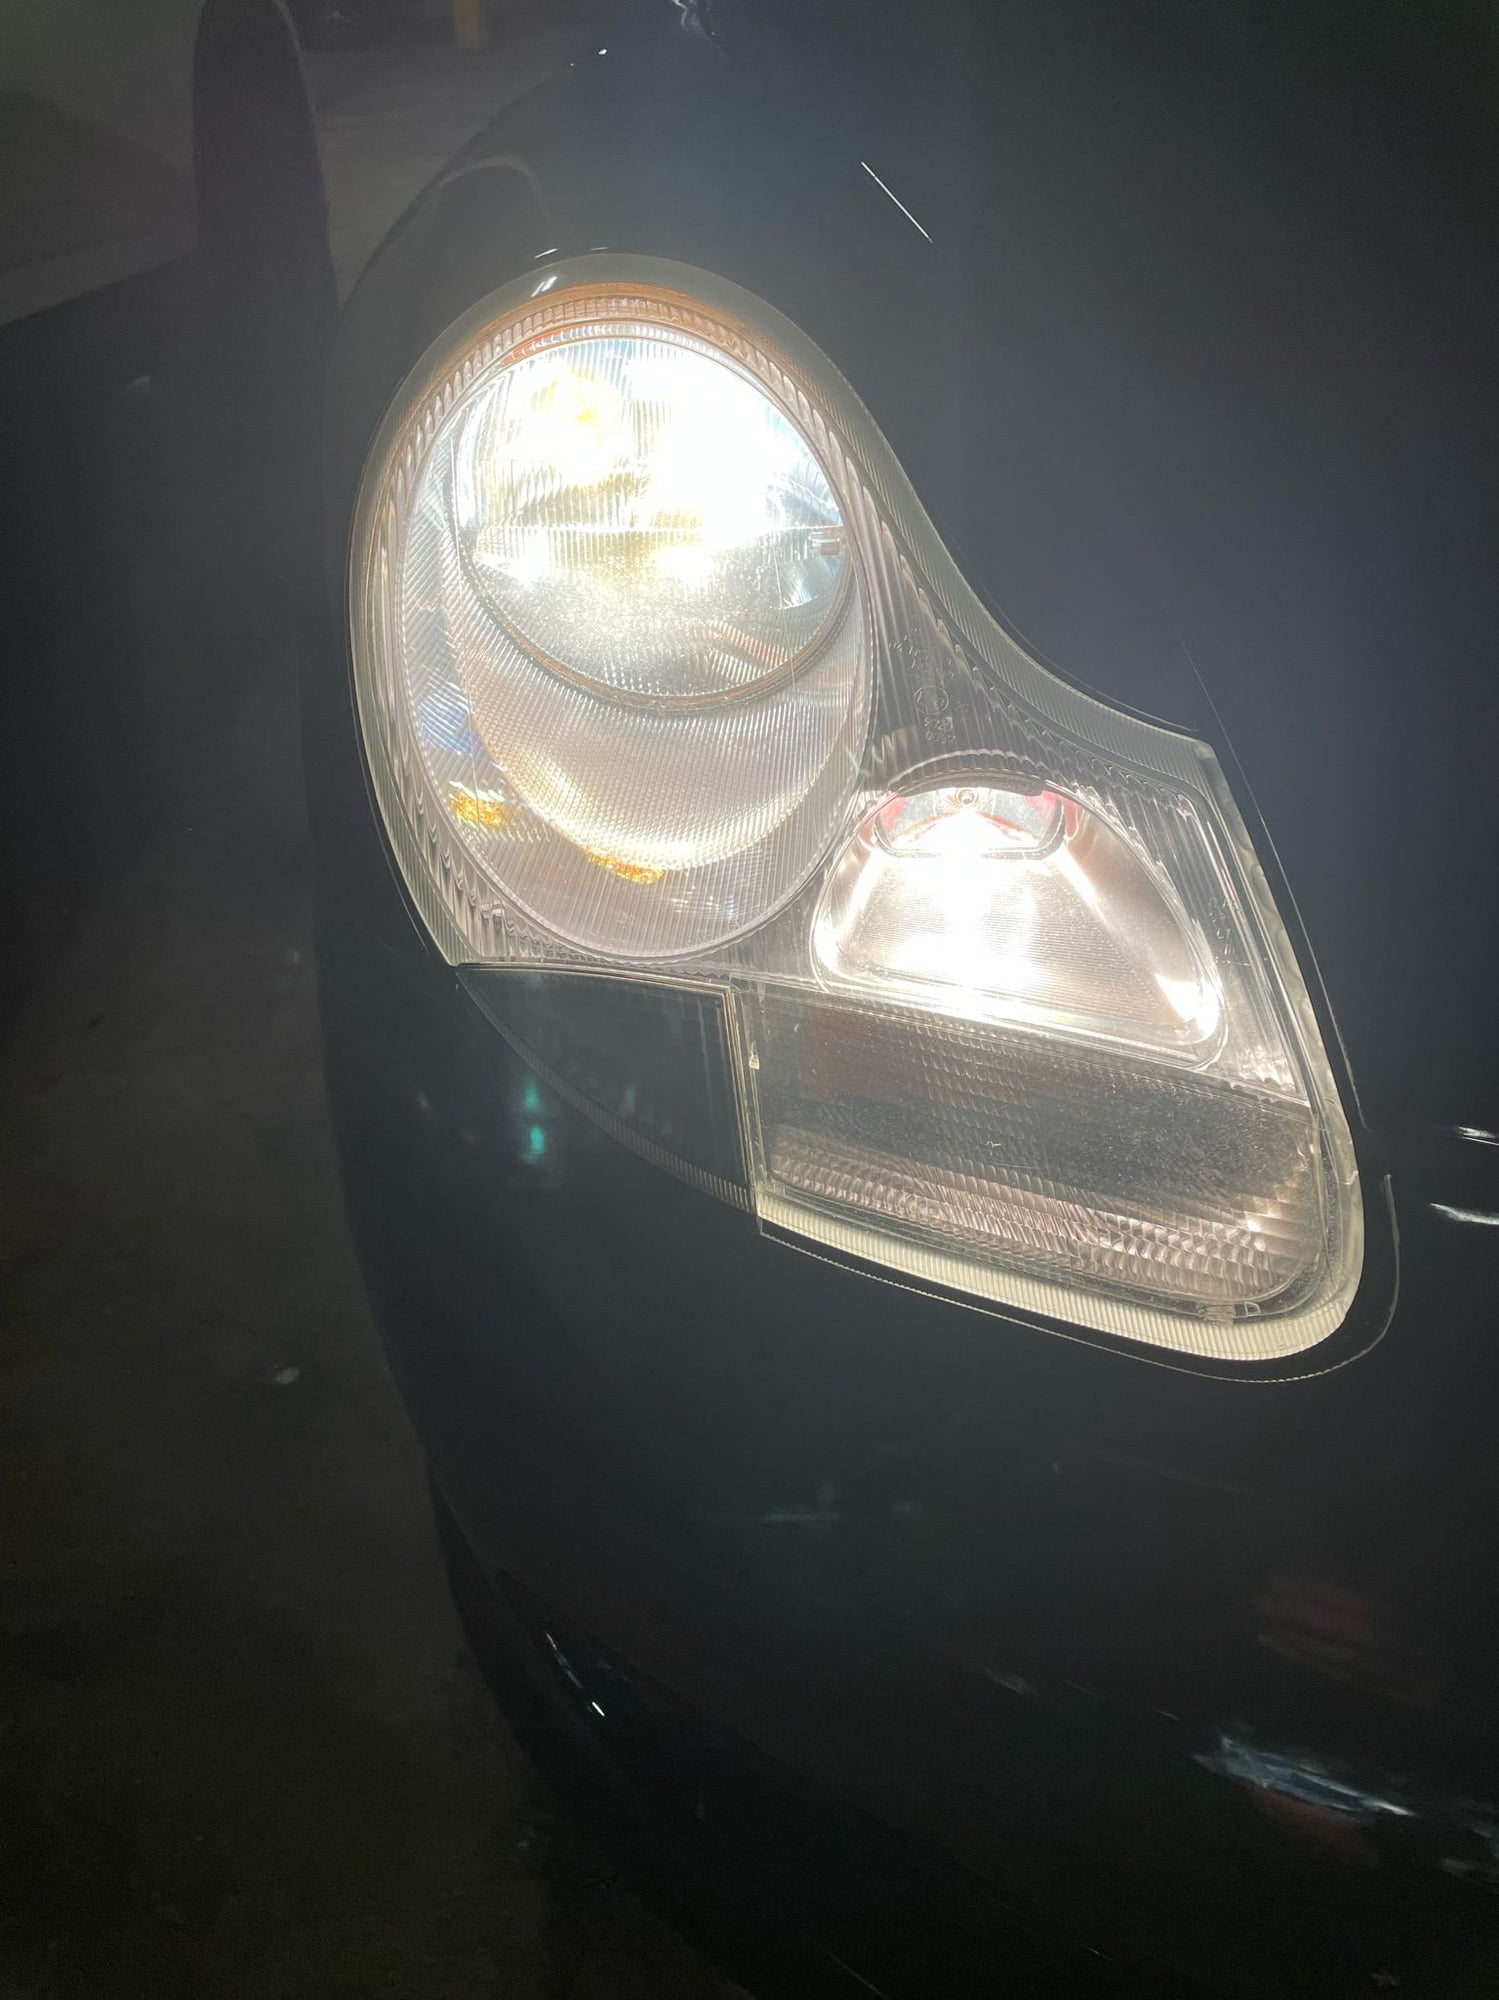 2000 Porsche 911 - Headlamps for sale - Milwaukee, WI 53202, United States